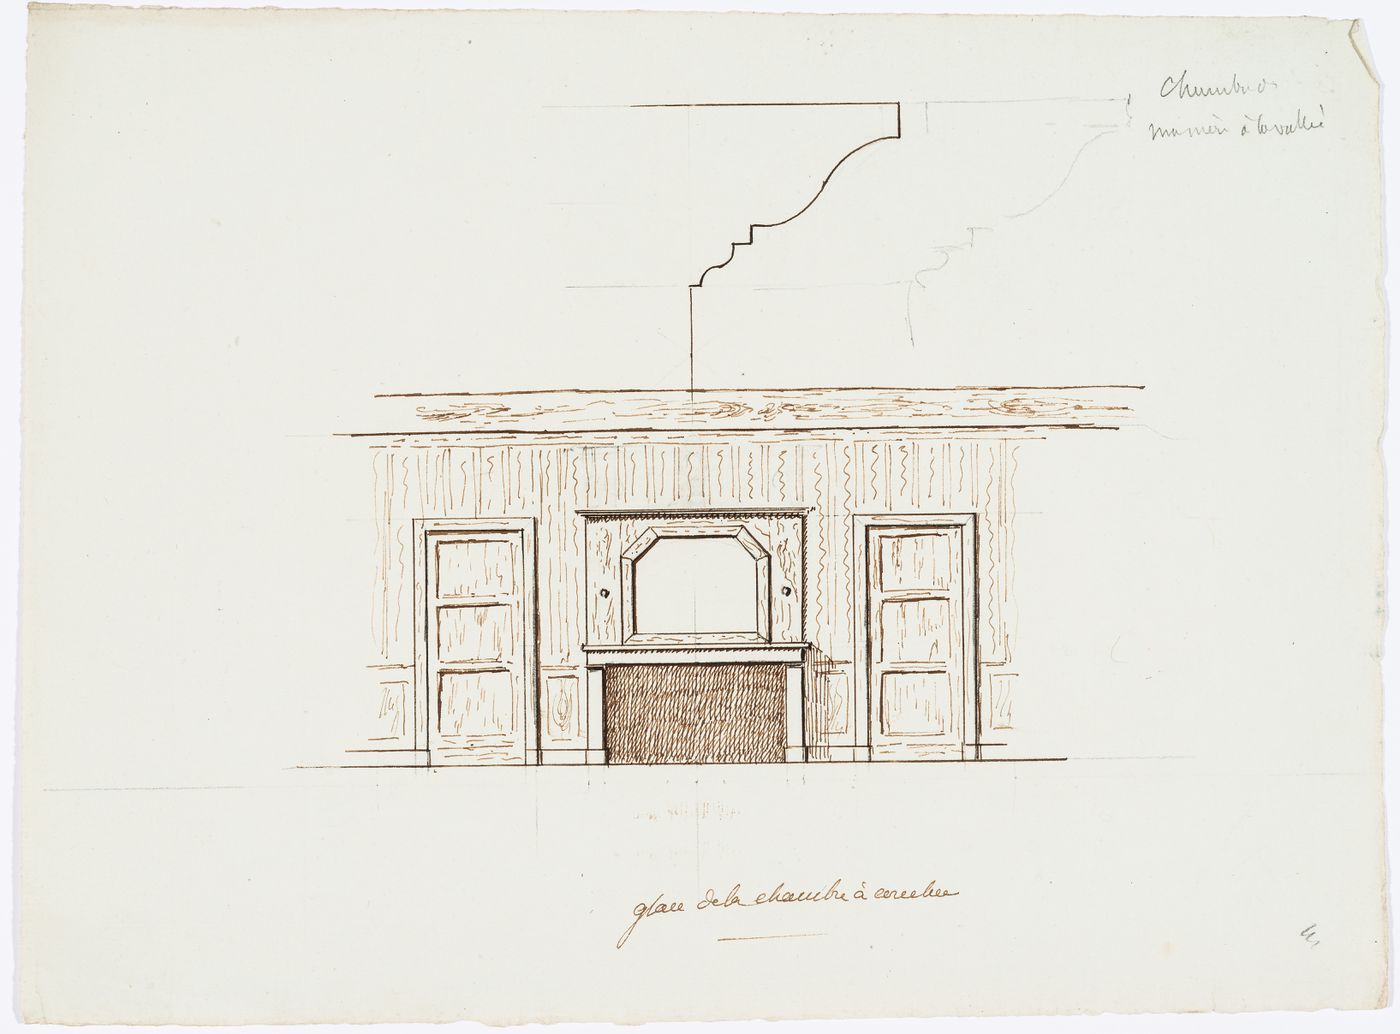 Interior wall elevation and profiles for the house, Domaine de La Vallée